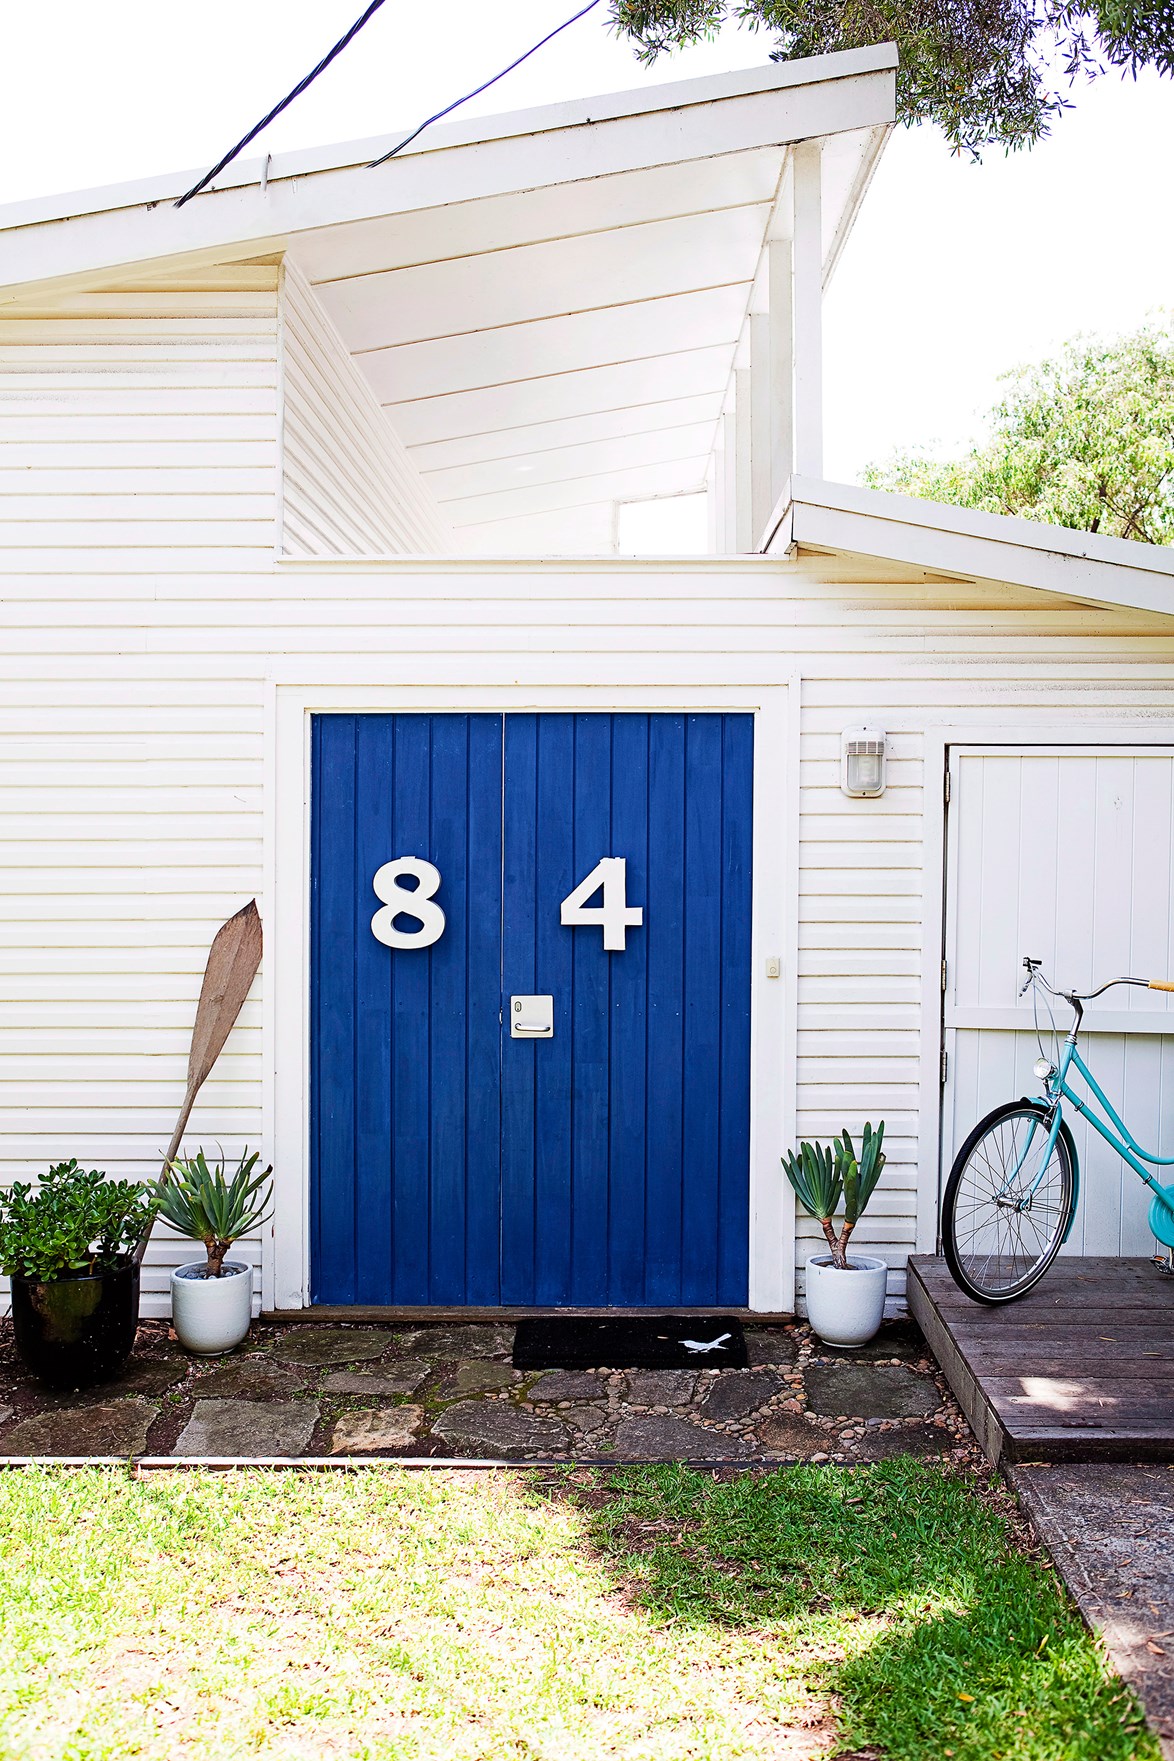 The blue and white combo suits this coastal home beautifully. The stylish large numbers mean visitors will never get lost!